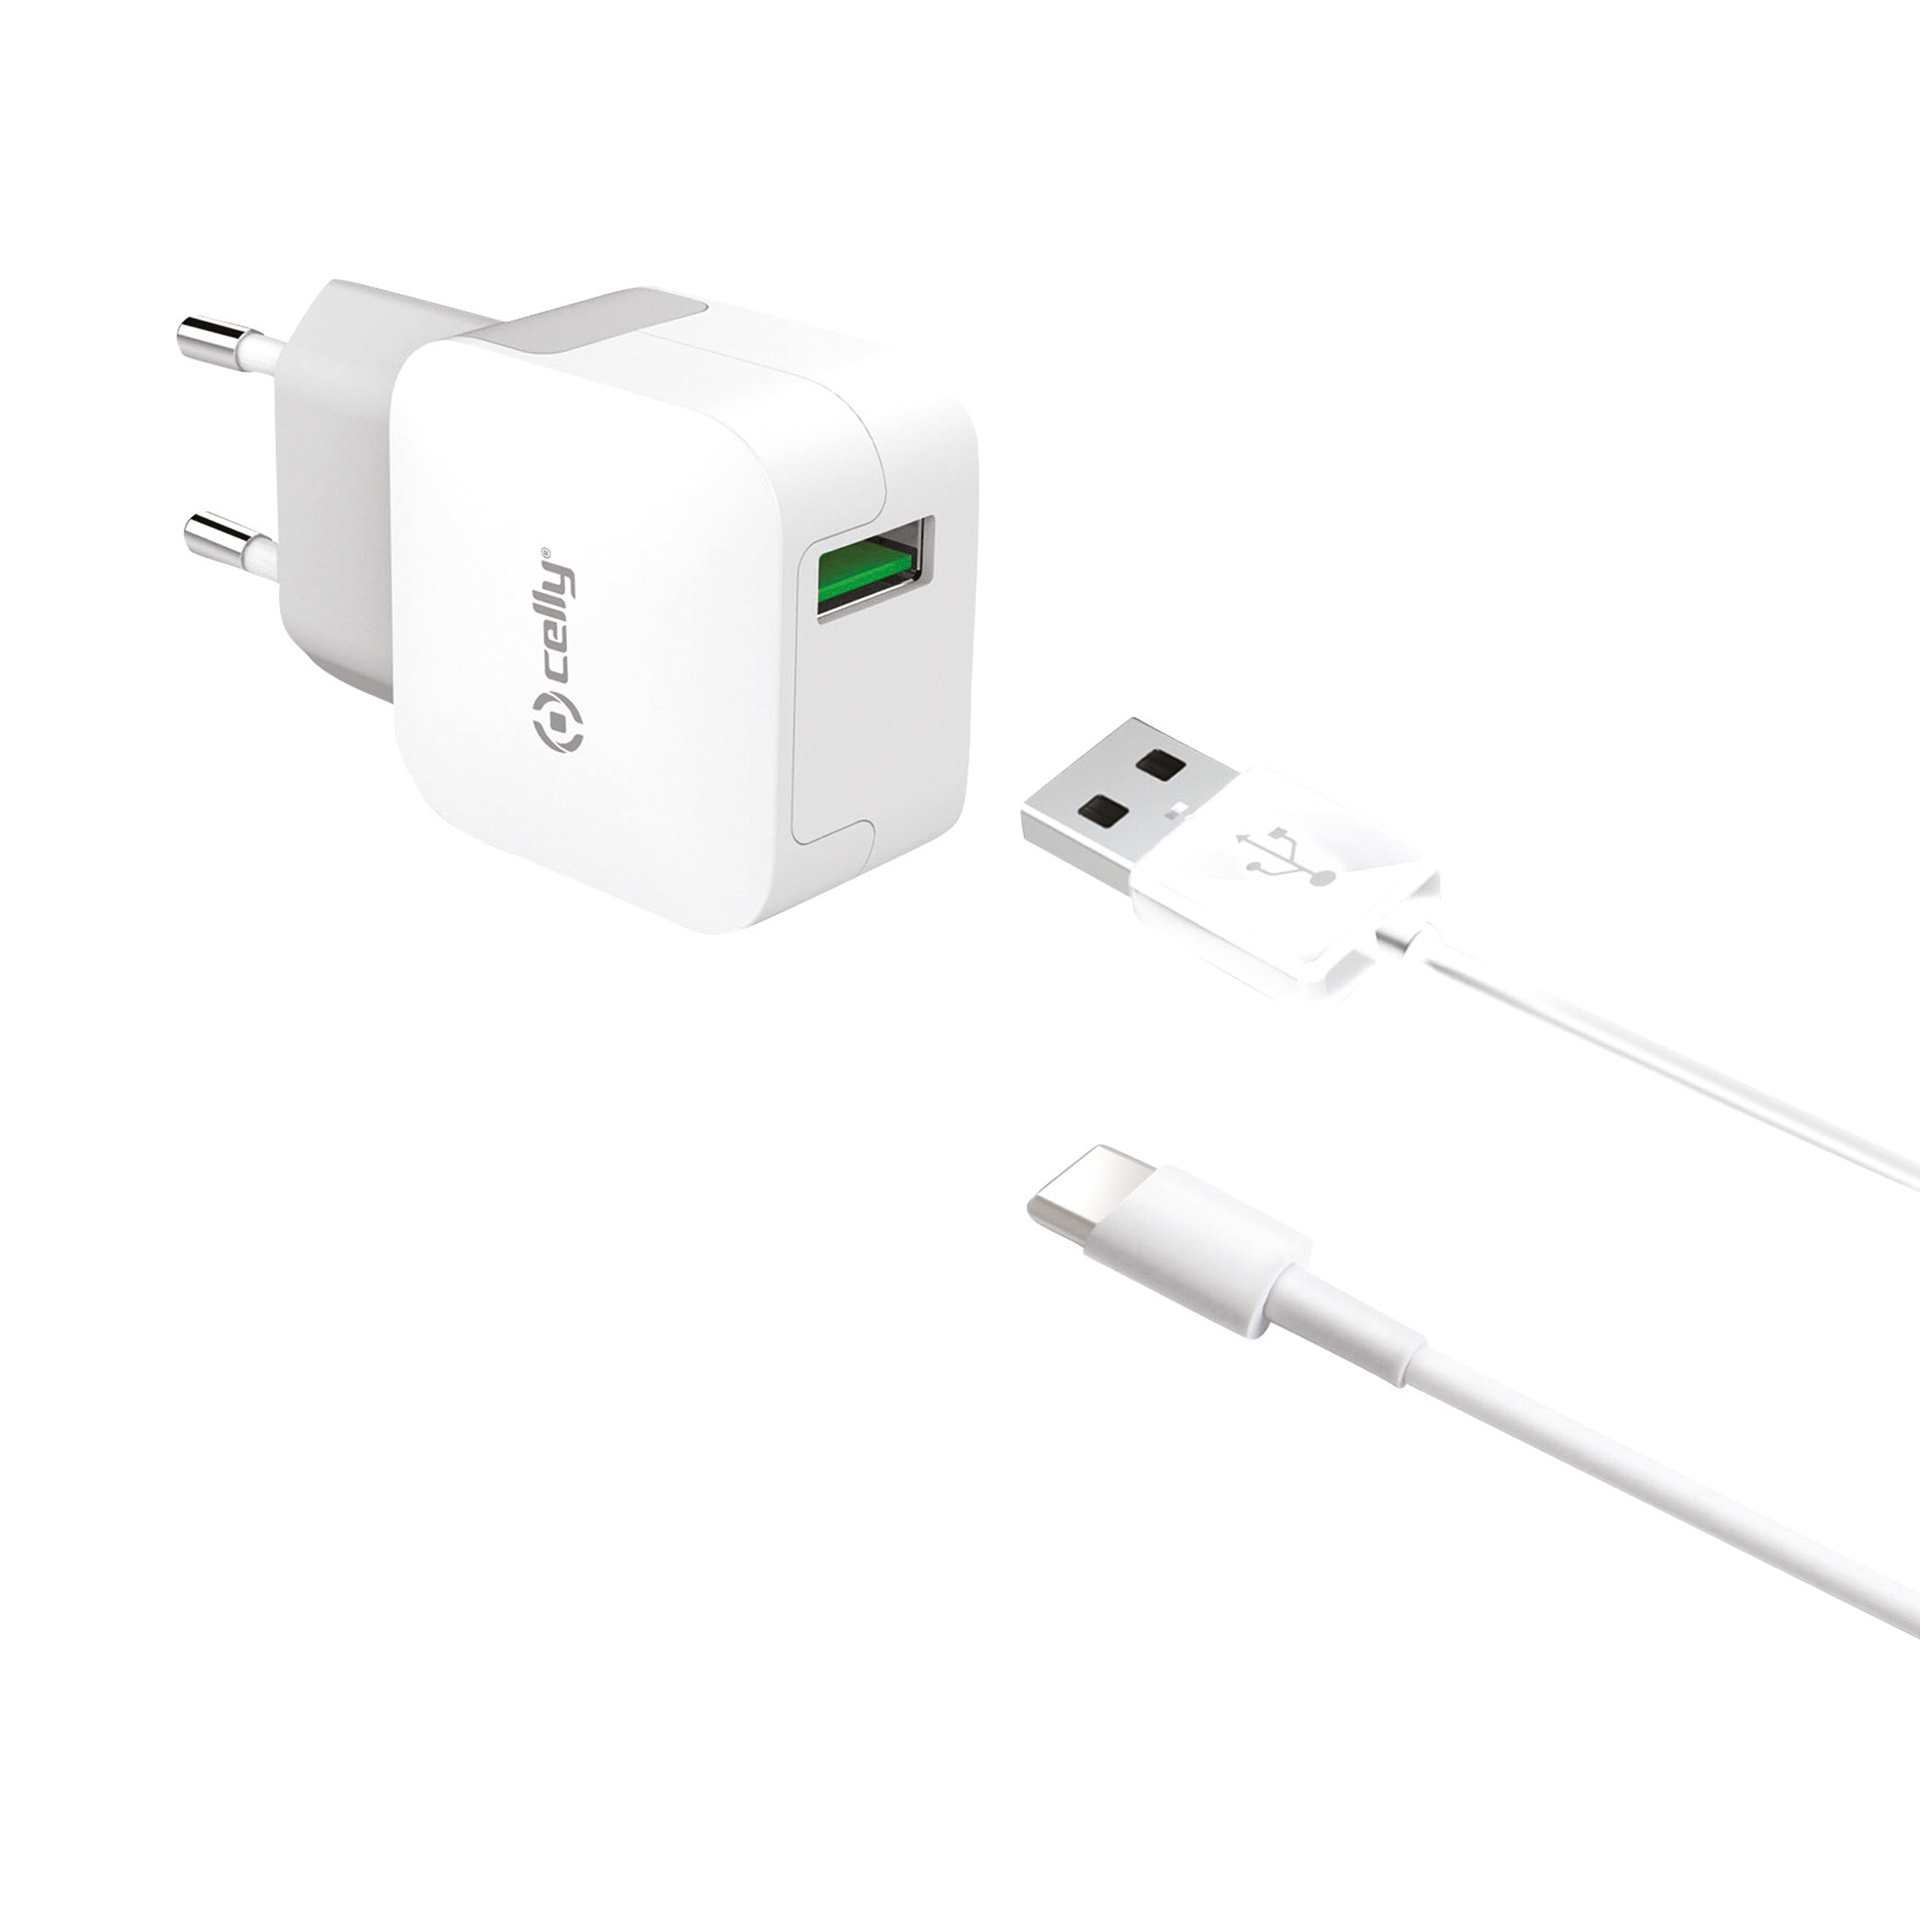 Celly Celly 5723882 Thuislader USB-C 2.4A Wit 0517556